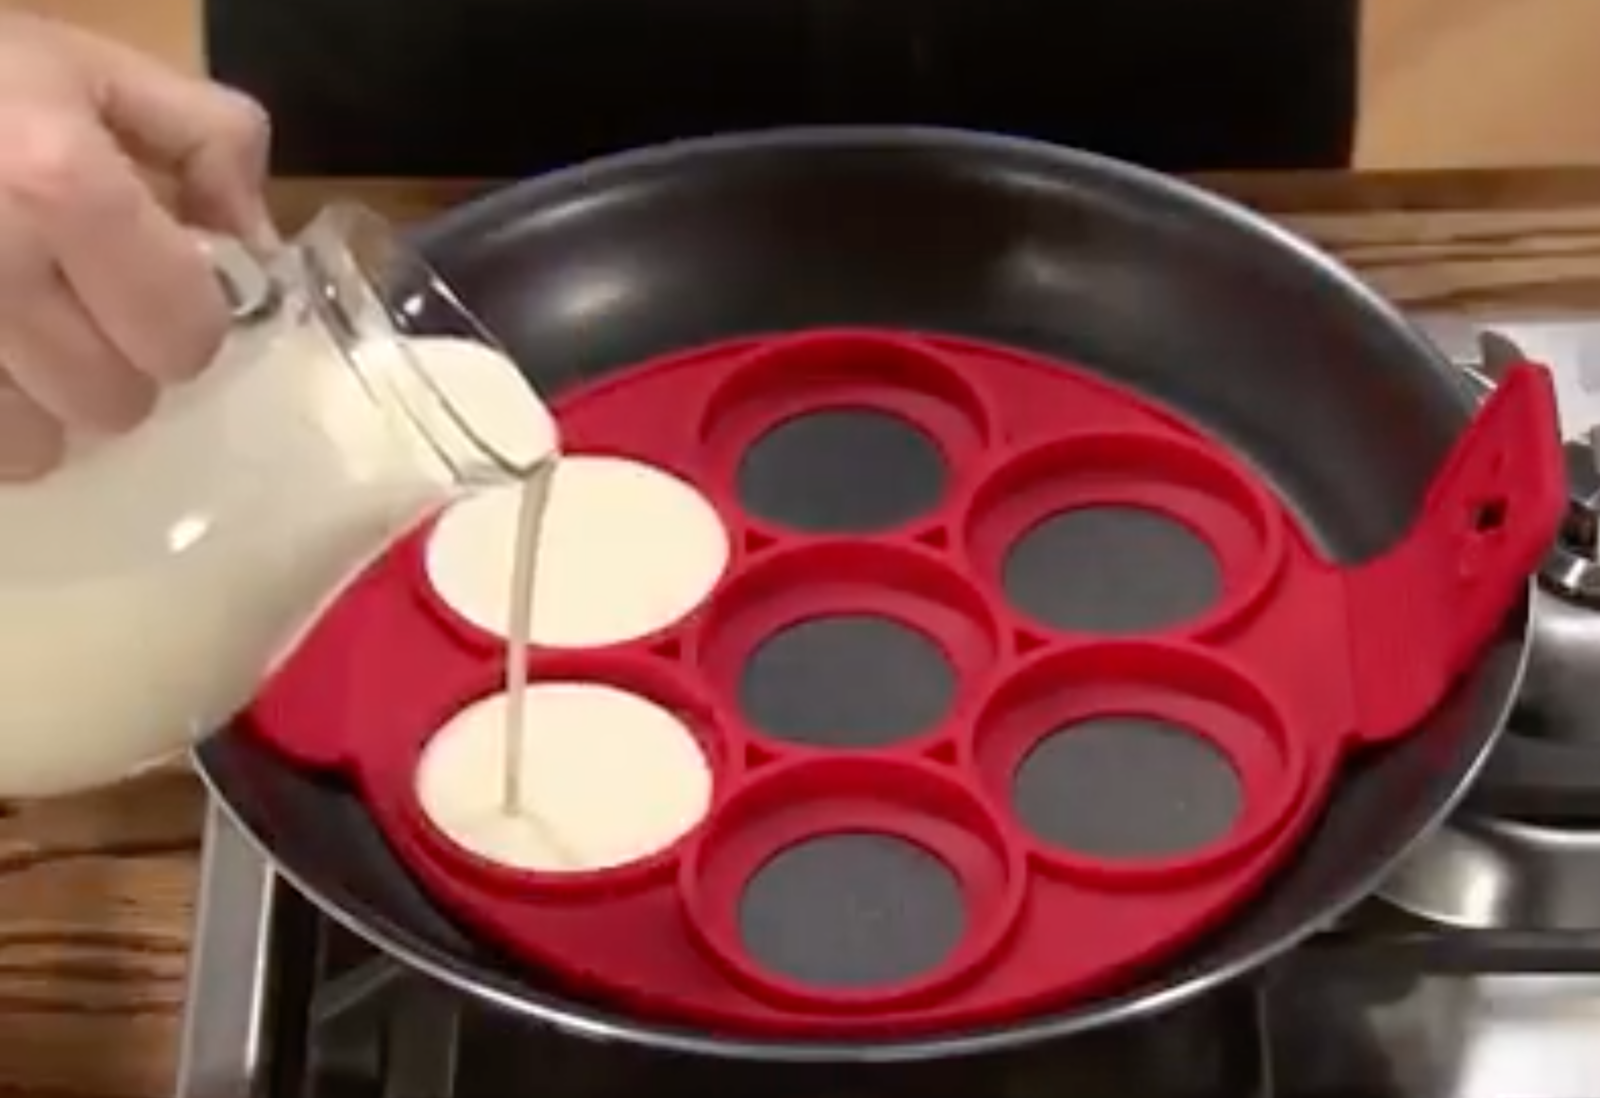 This silicone mould makes cooking and flipping pancakes really easy, The Manc